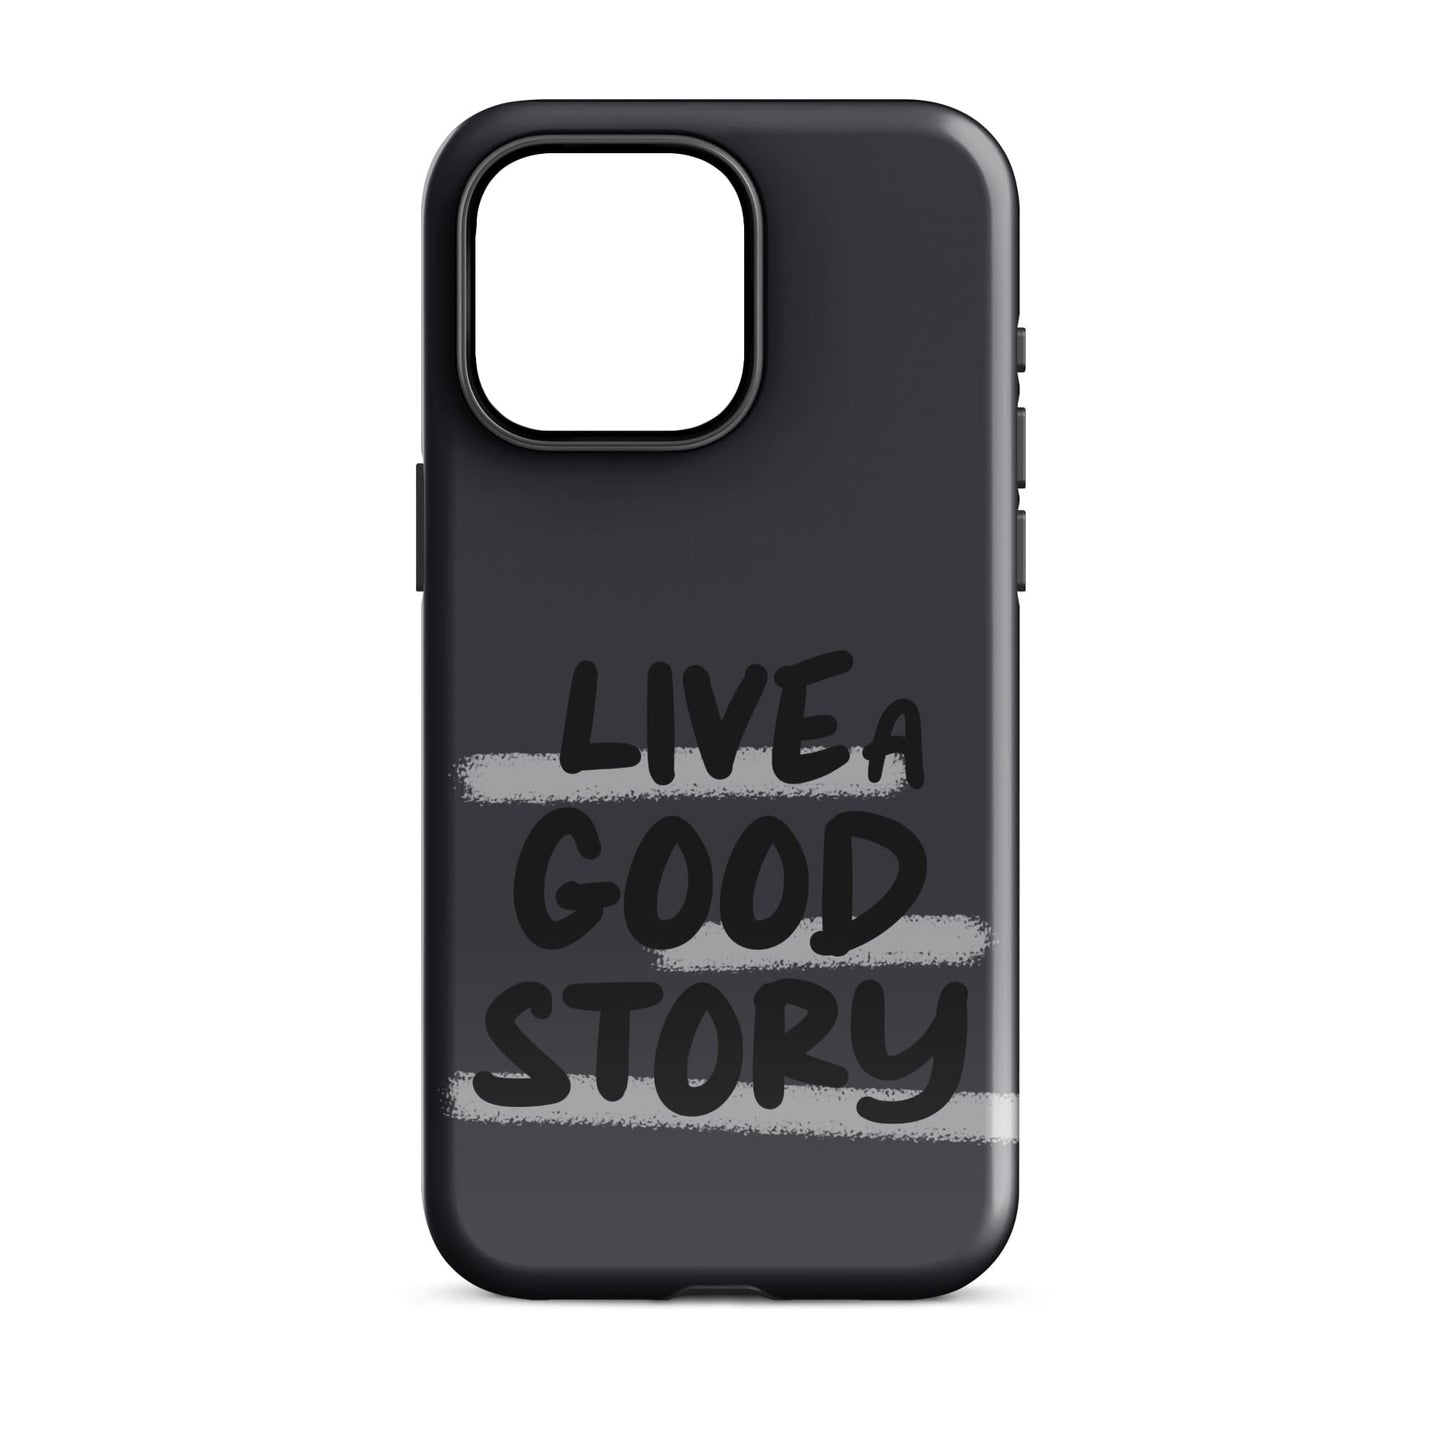 Live A Good Story - (Blue Grey) Quoted iPhone Case